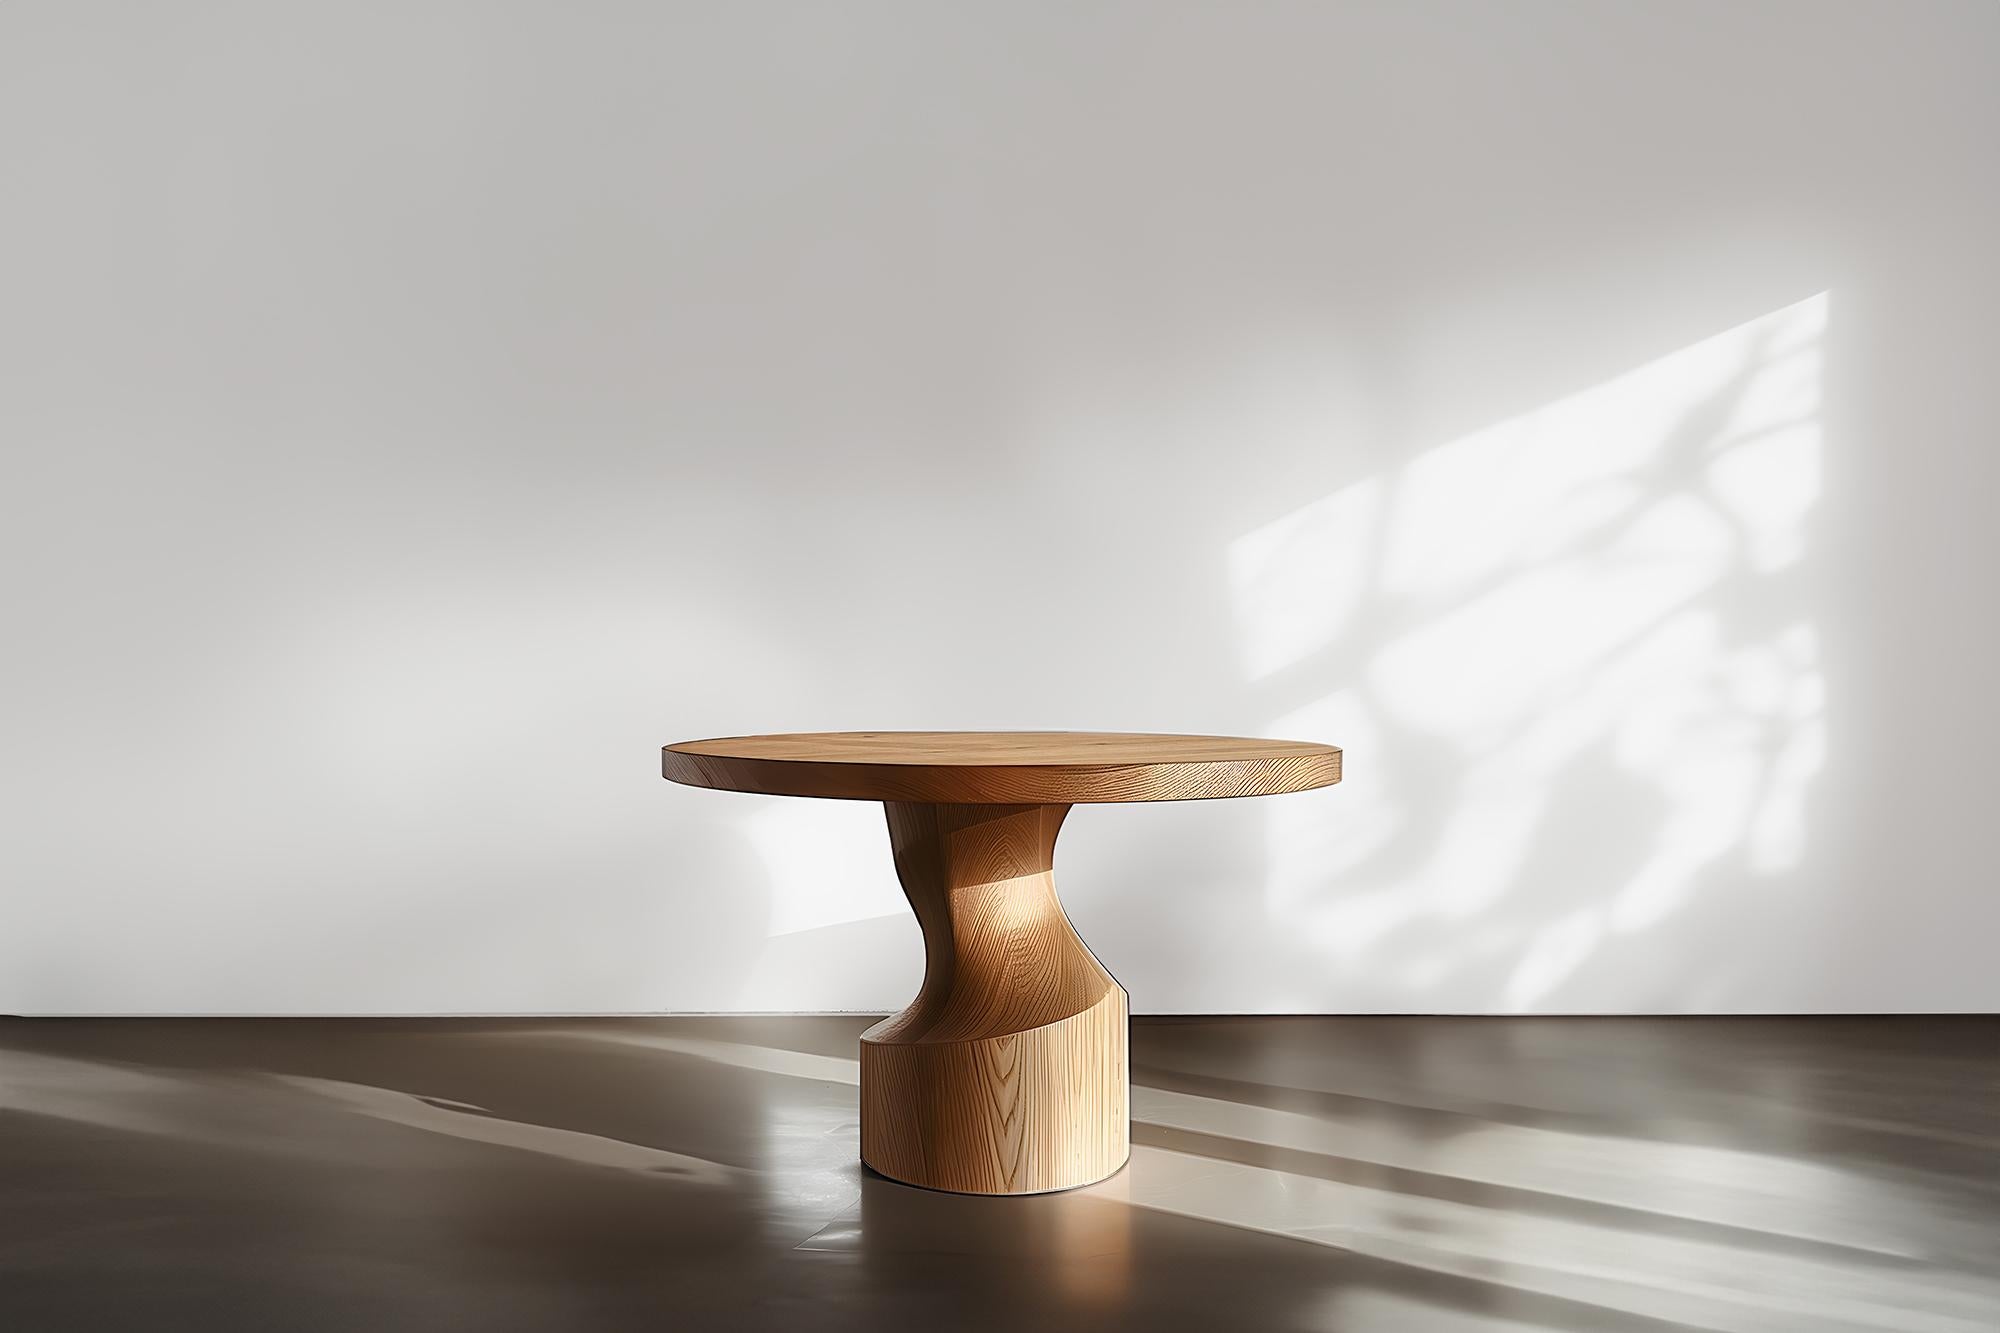 Socle No08, Conference Tables by NONO, Solid Wood Symmetry

——

Introducing the 